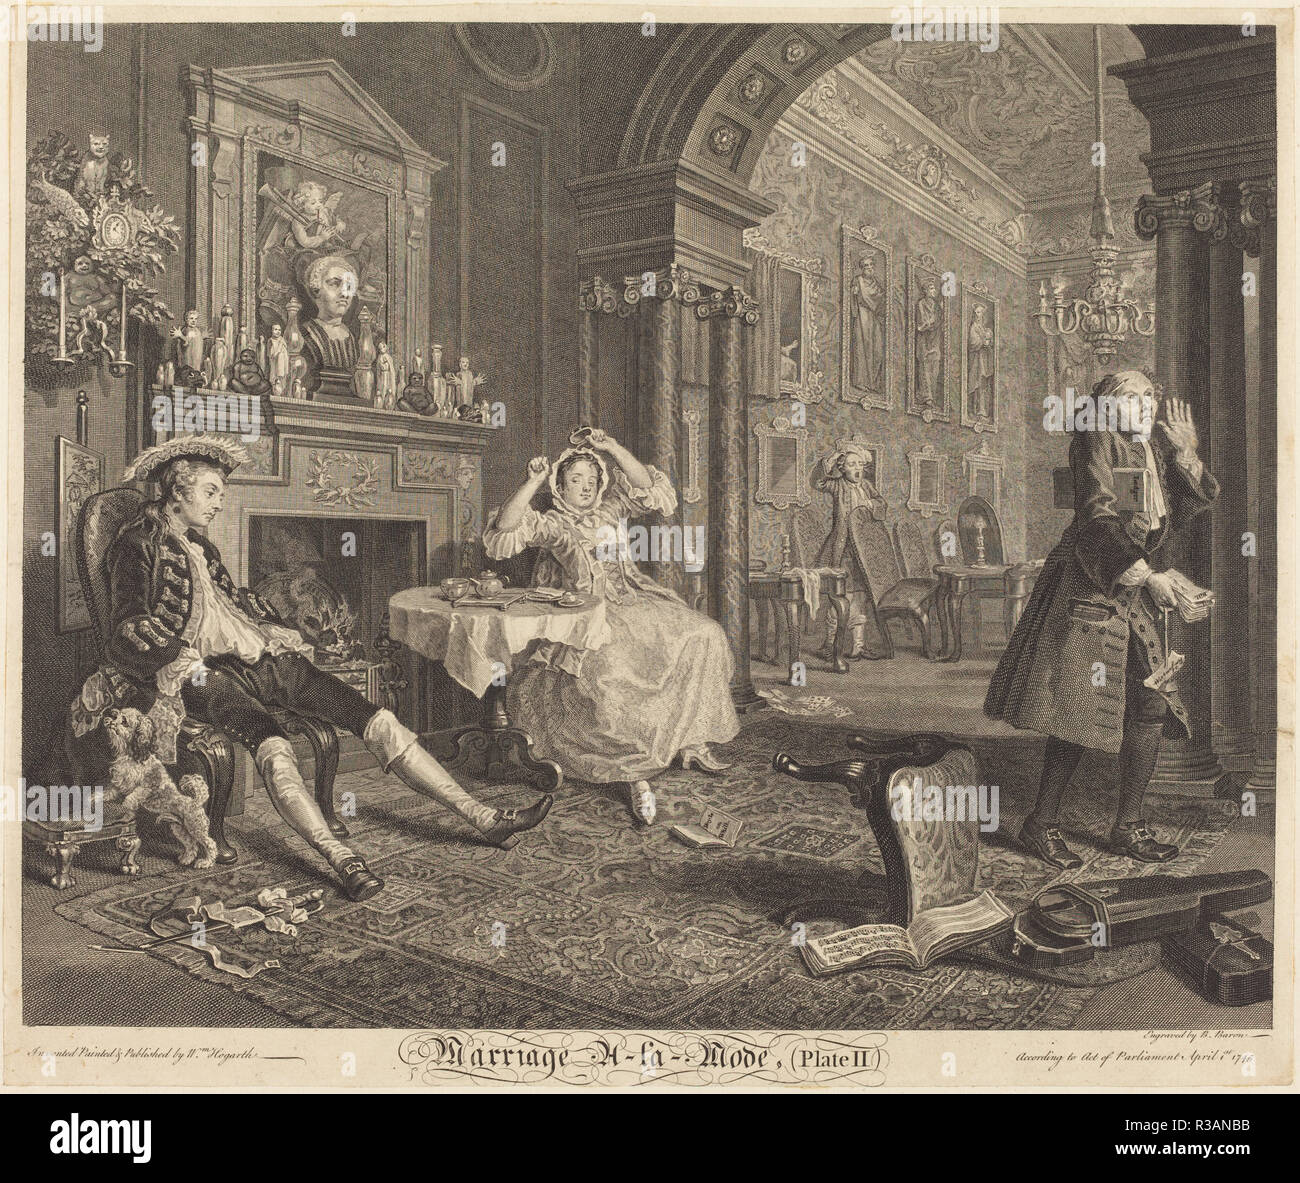 Marriage a la Mode: pl. 2. Dated: 1745. Medium: etching and engraving. Museum: National Gallery of Art, Washington DC. Author: Bernard Baron after William Hogarth. after William Hogarth. William Hogarth. Bernard Baron. Stock Photo